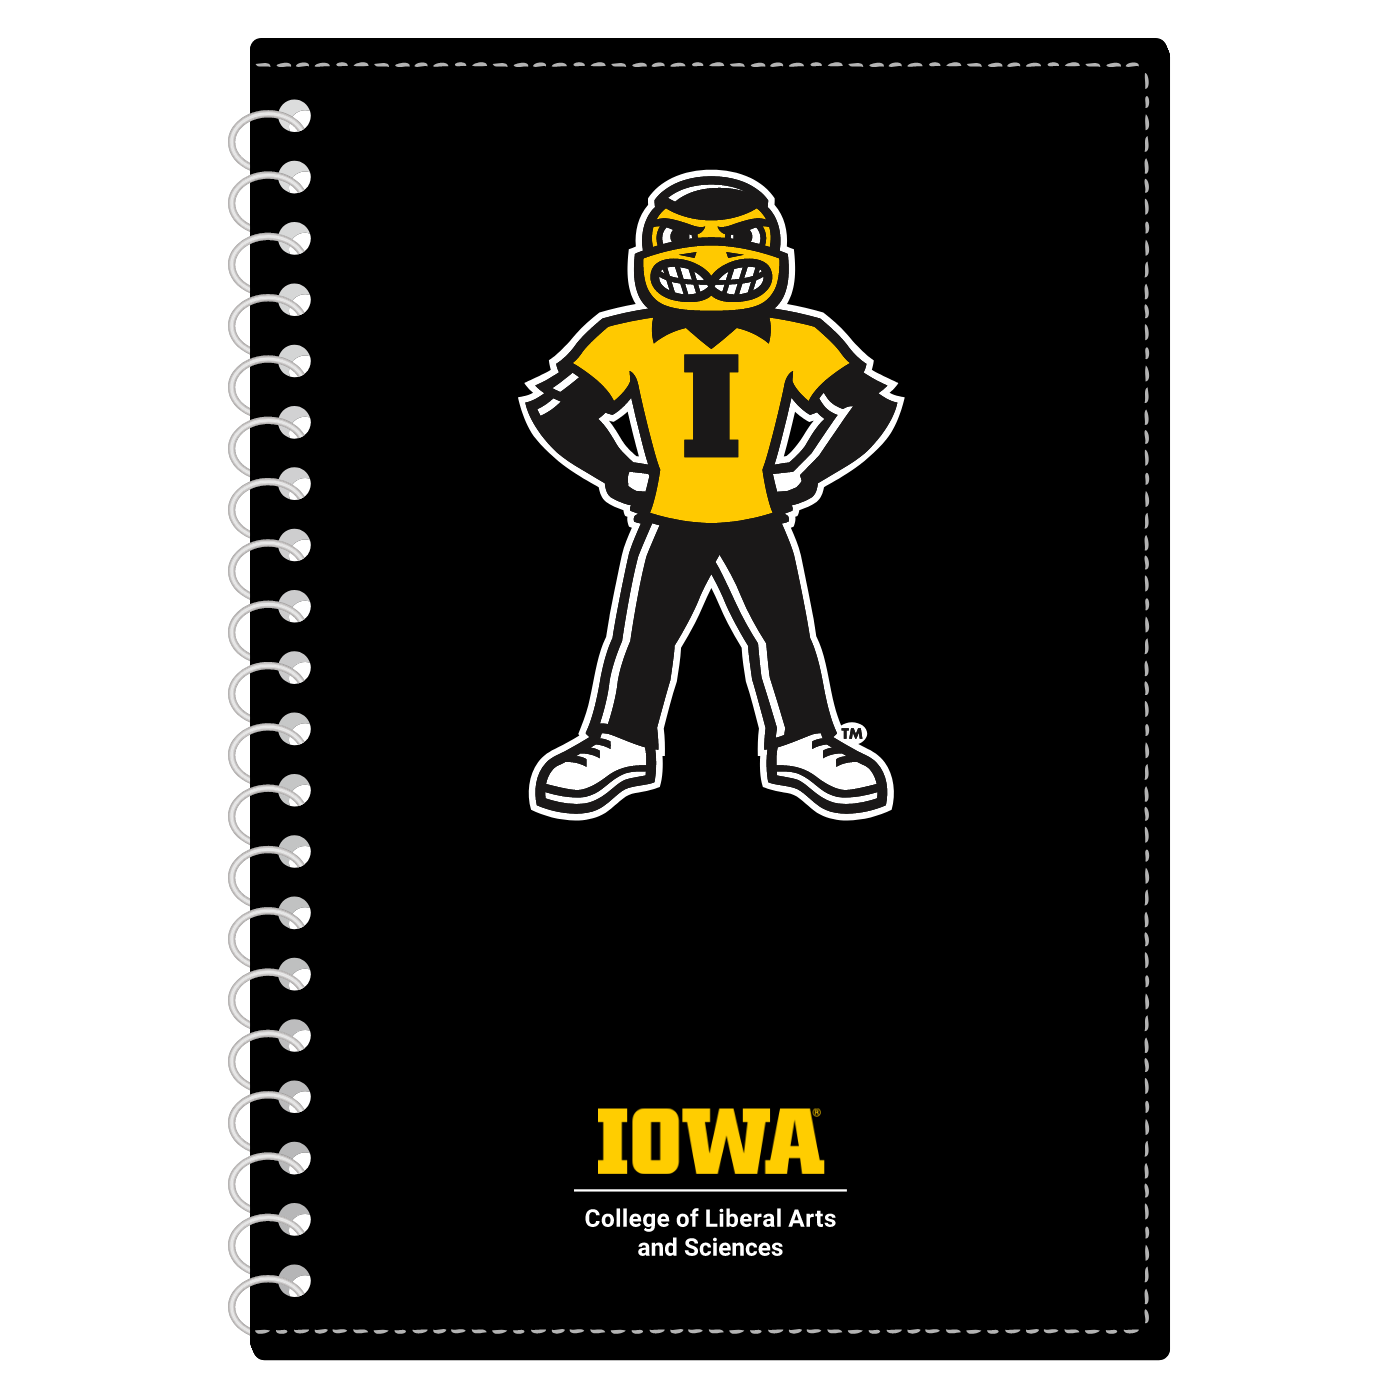 Herky shown on the cover of a journal